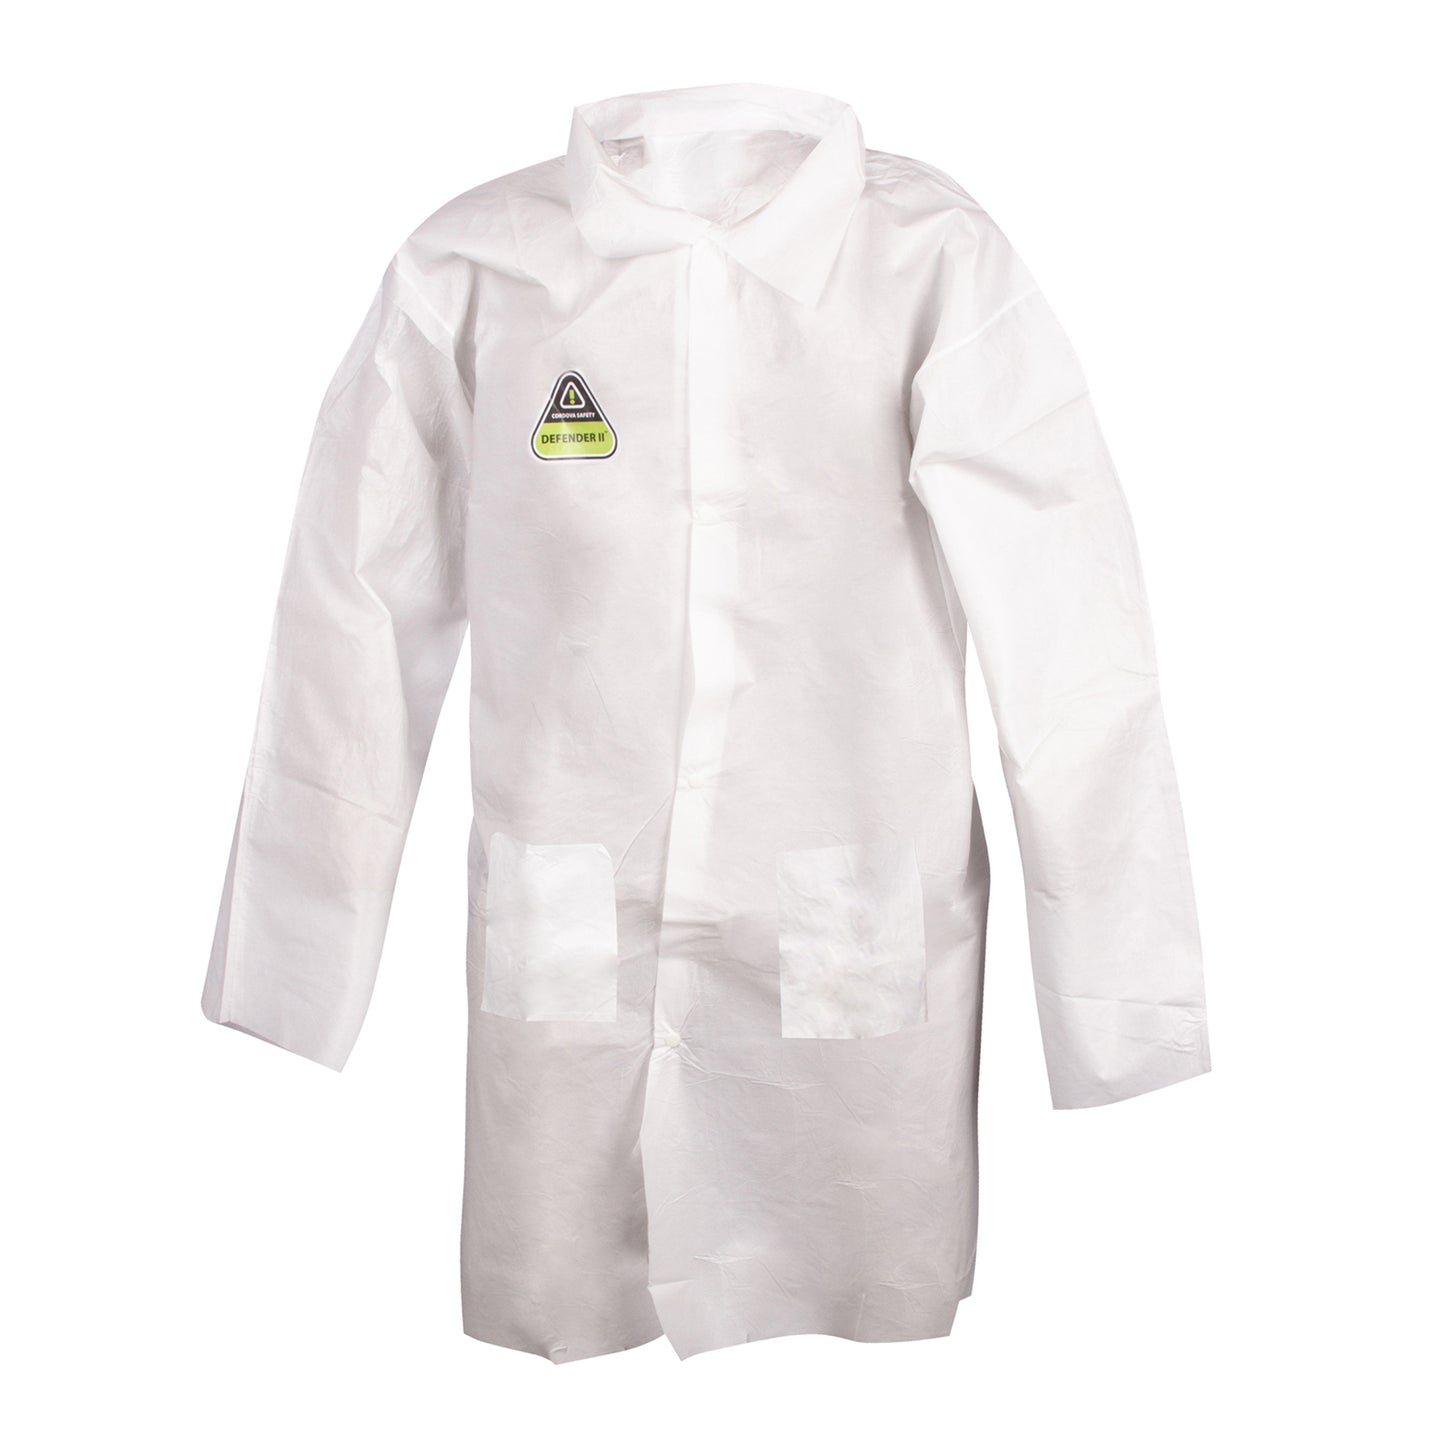 White Disposable Lab Coats with Pockets, Bulk 30-Pack